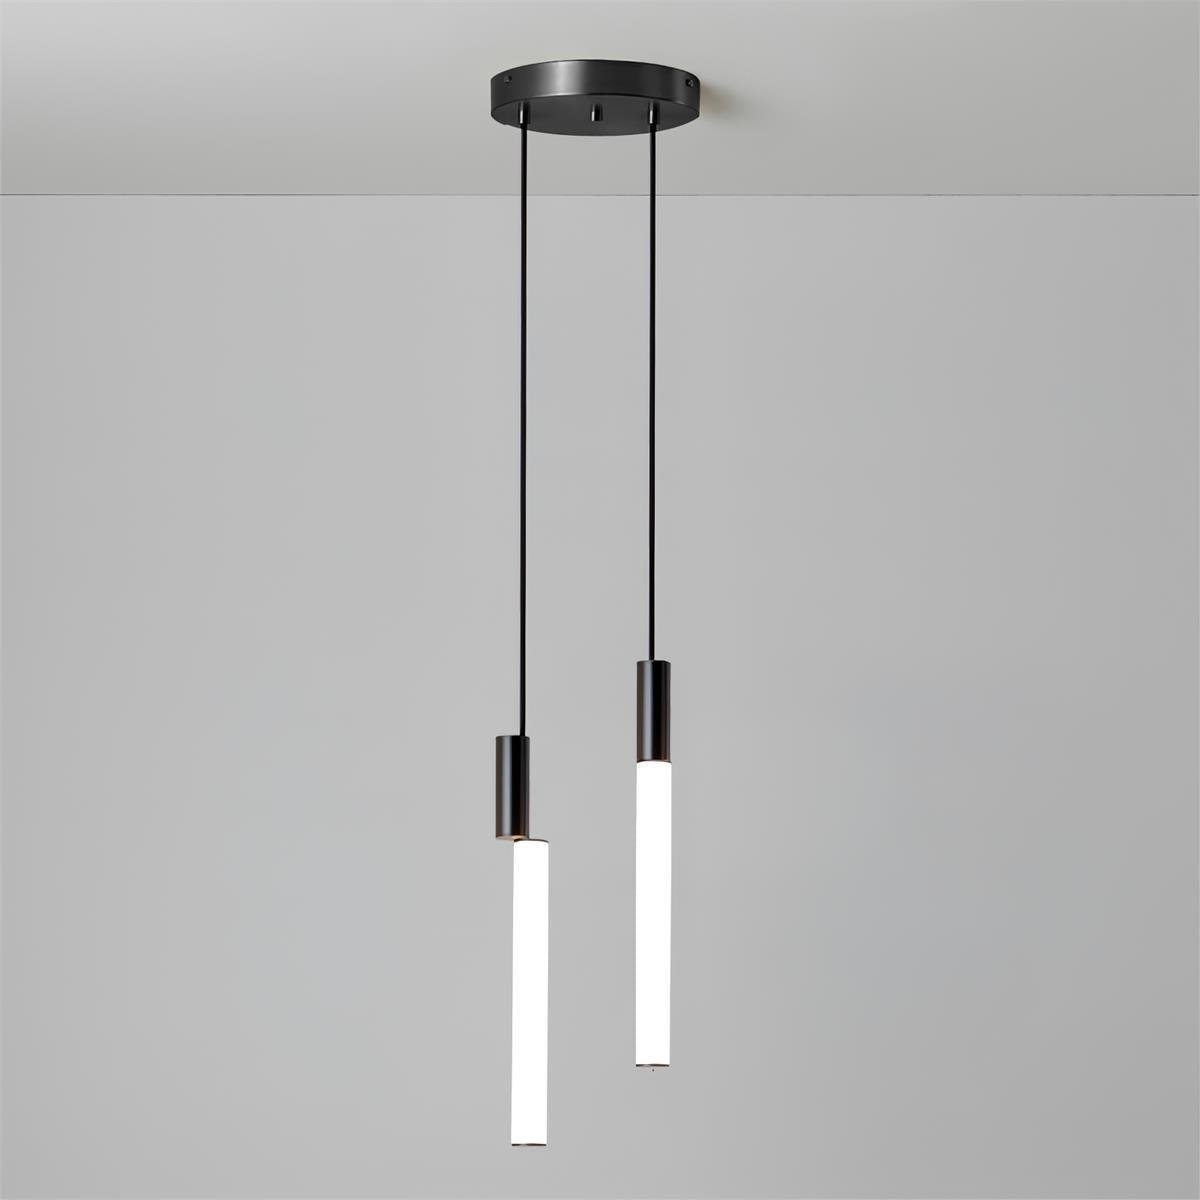 LED Pendant Light with Signal Design, 2 Heads, 5.9" Diameter x 59" Height (15cm Dia x 150cm H), in Black and White, emitting Cool Light.